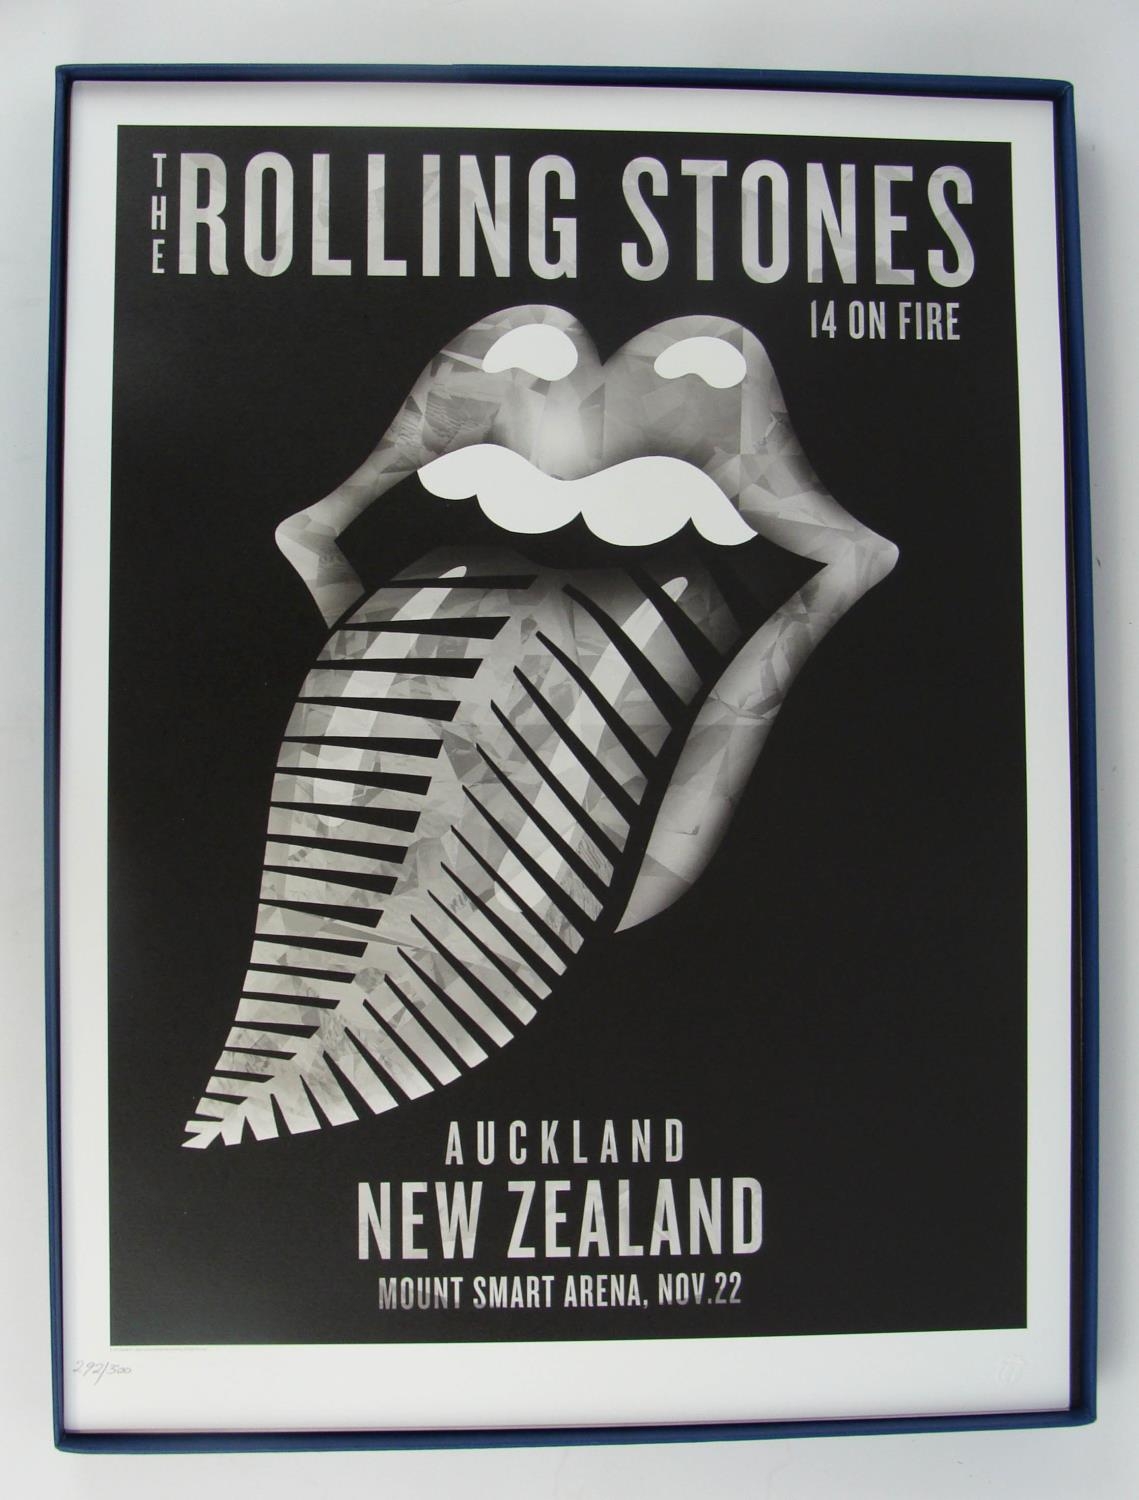 ROLLING STONES '14 on FIRE' BOX SET, of 13 lithographic posters from the 2014 Australia and New - Image 20 of 21